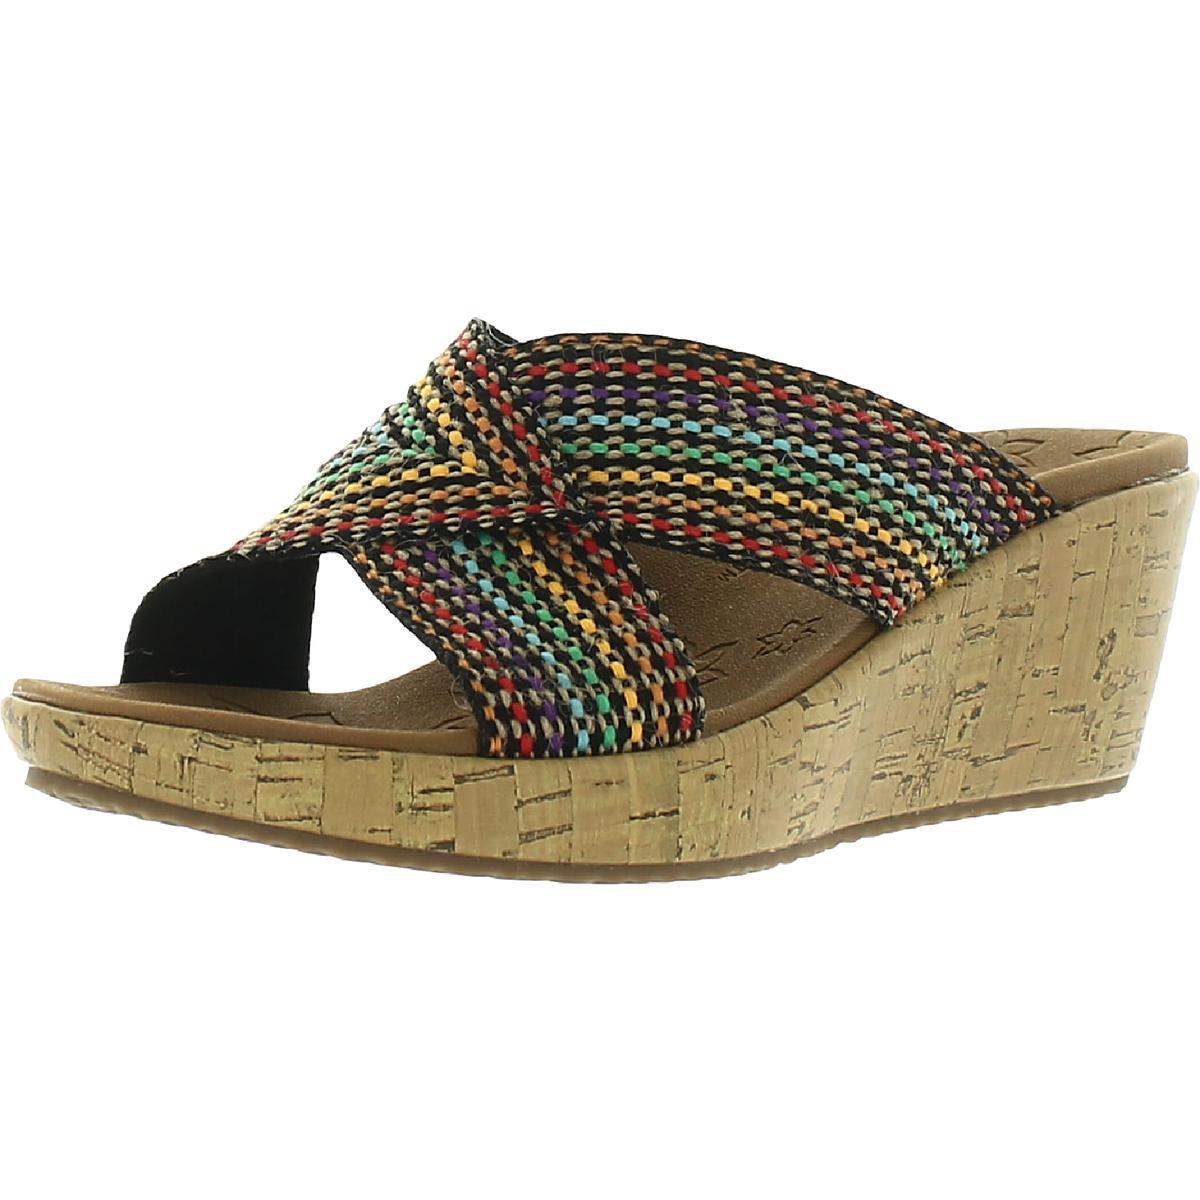 Skechers Womens Dressy Padded Insole Slip On Wedge Sandals Shoes Bhfo 6685 Multi